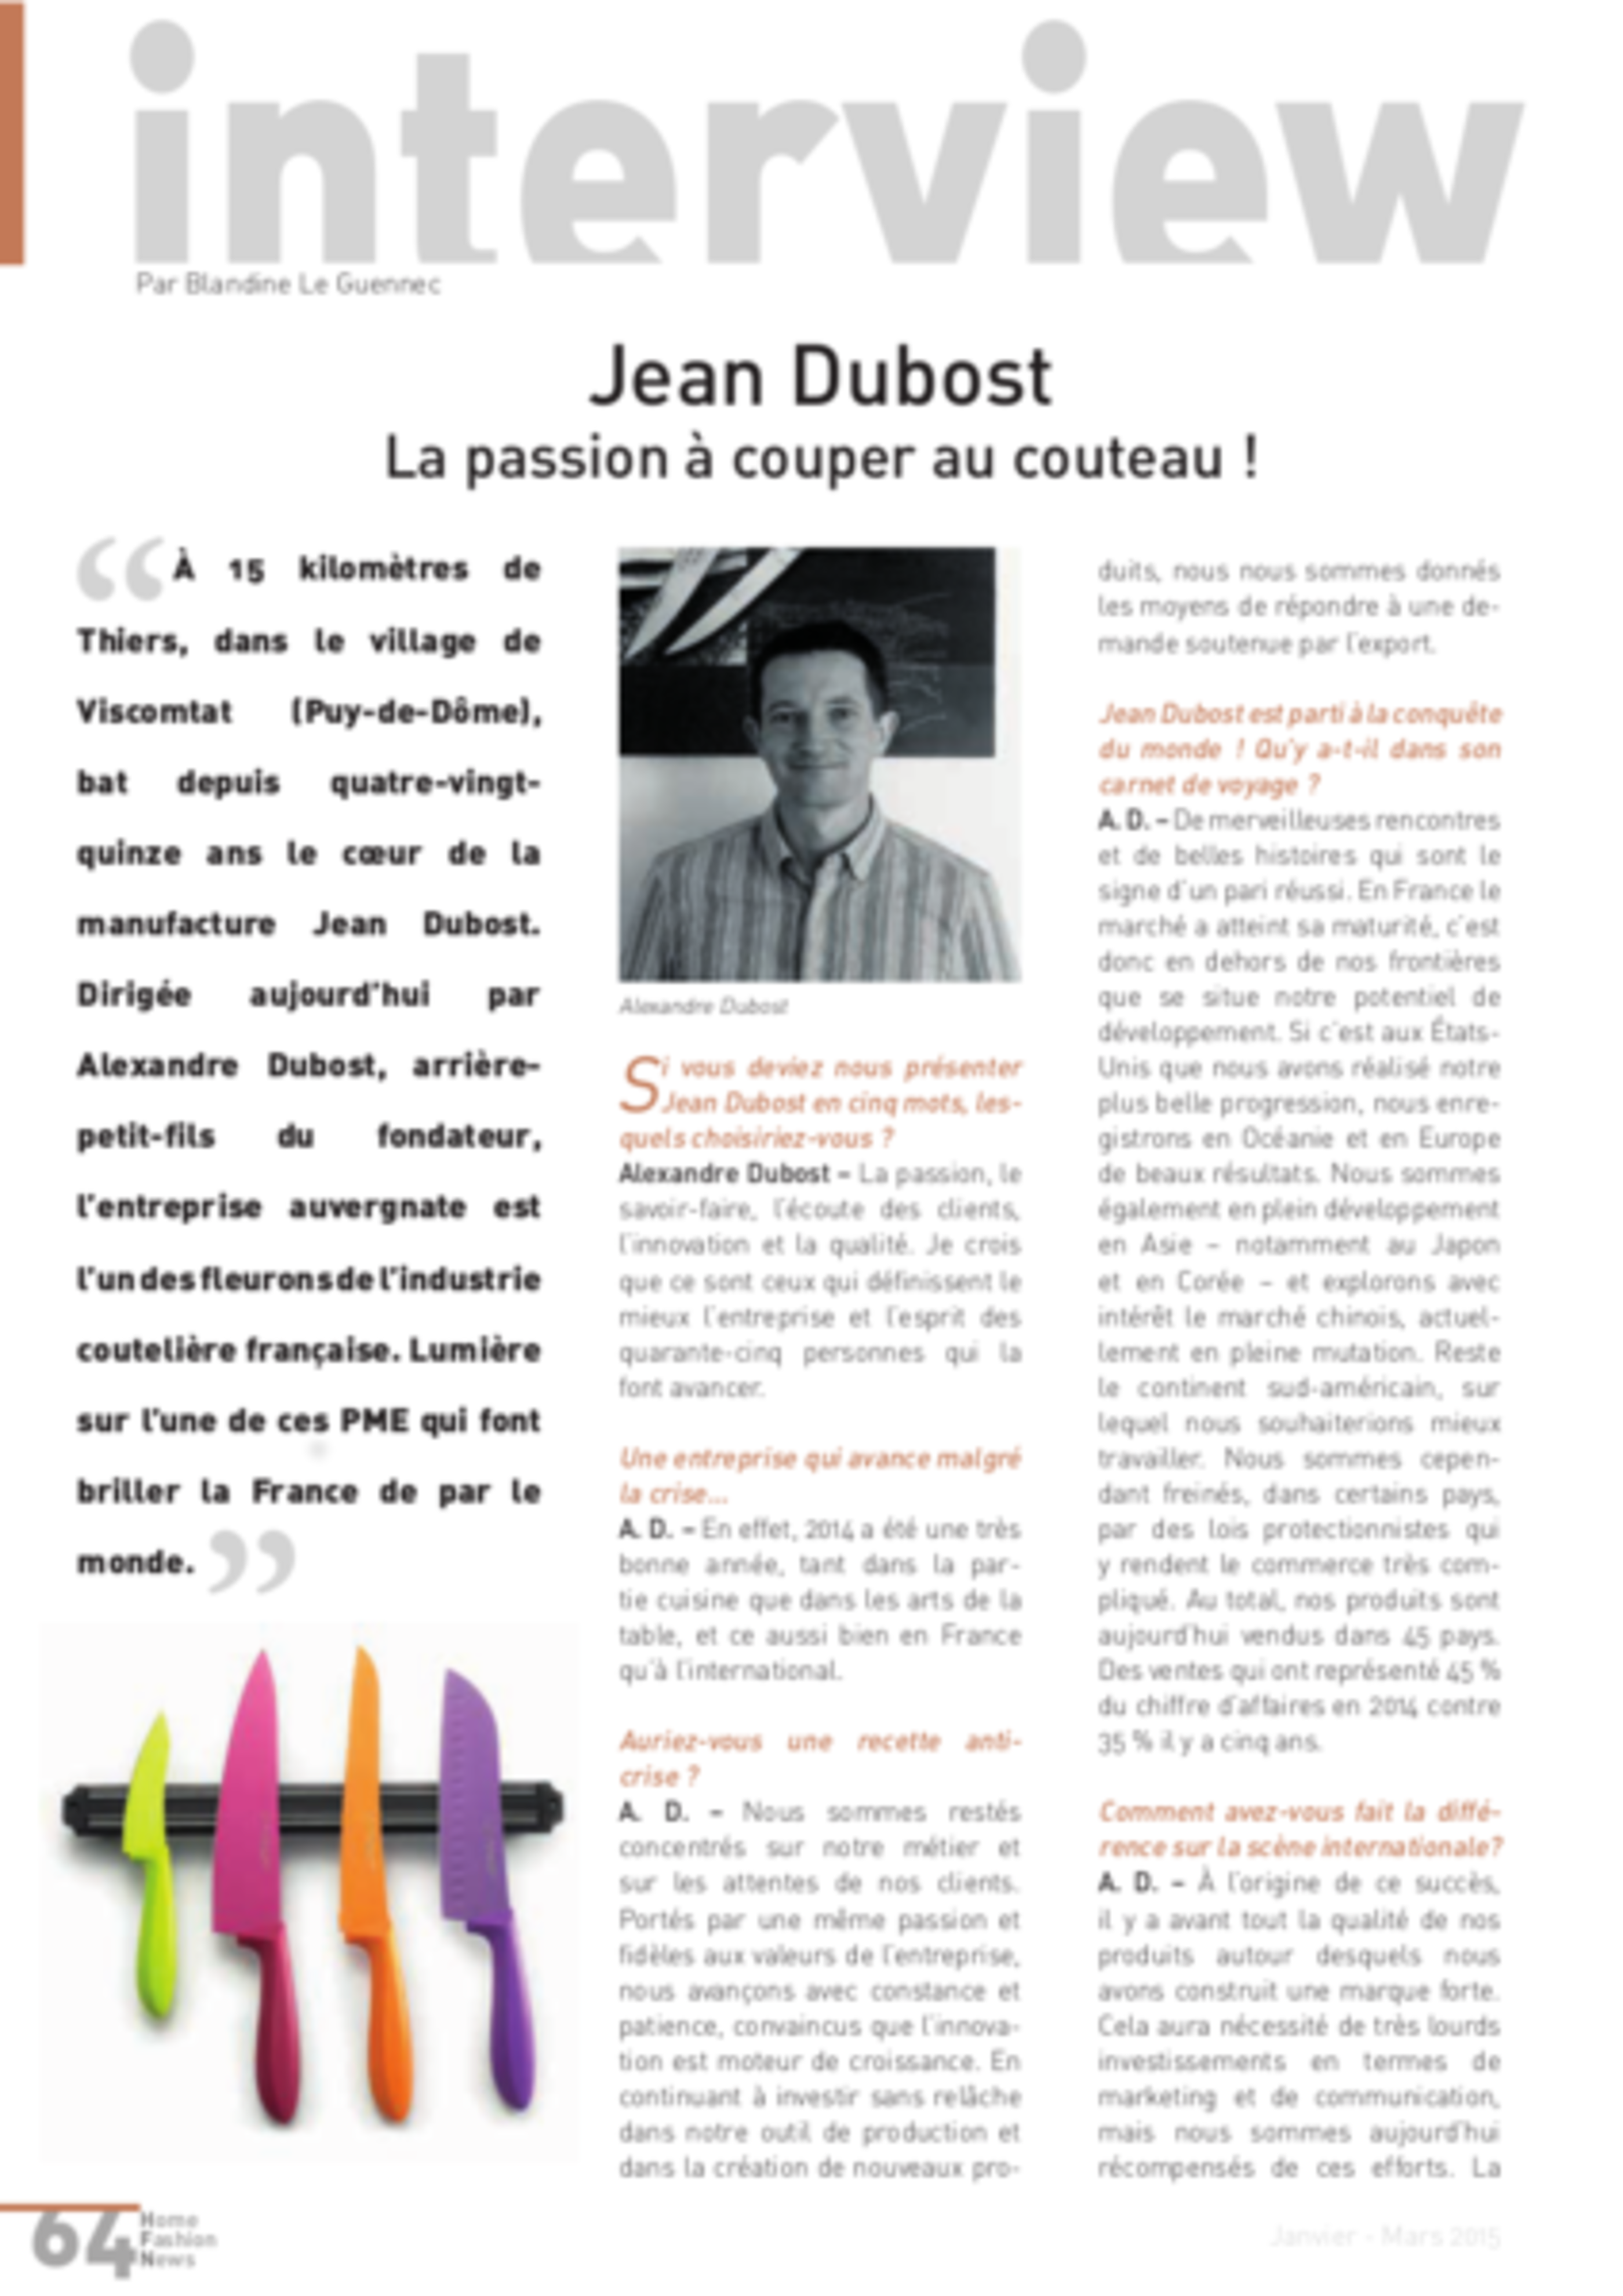 Coutellerie Jean Dubost - Home Fashion news n°15 Janvier - Mars 2015